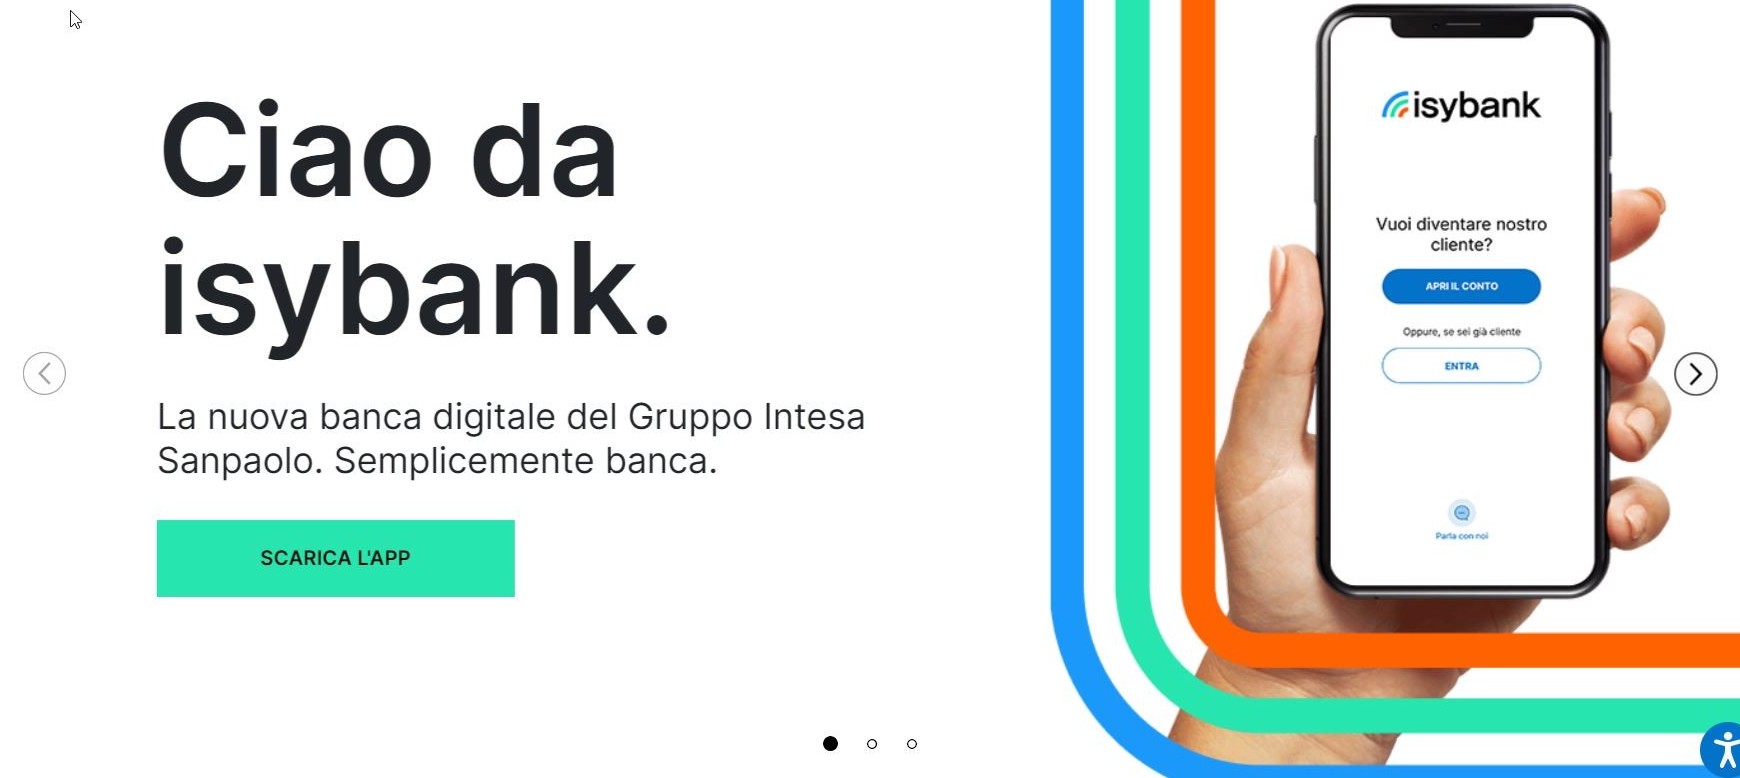 What are the real advantages of Isybank (New Intesa Sanpaolo Bank) and how is it different from others